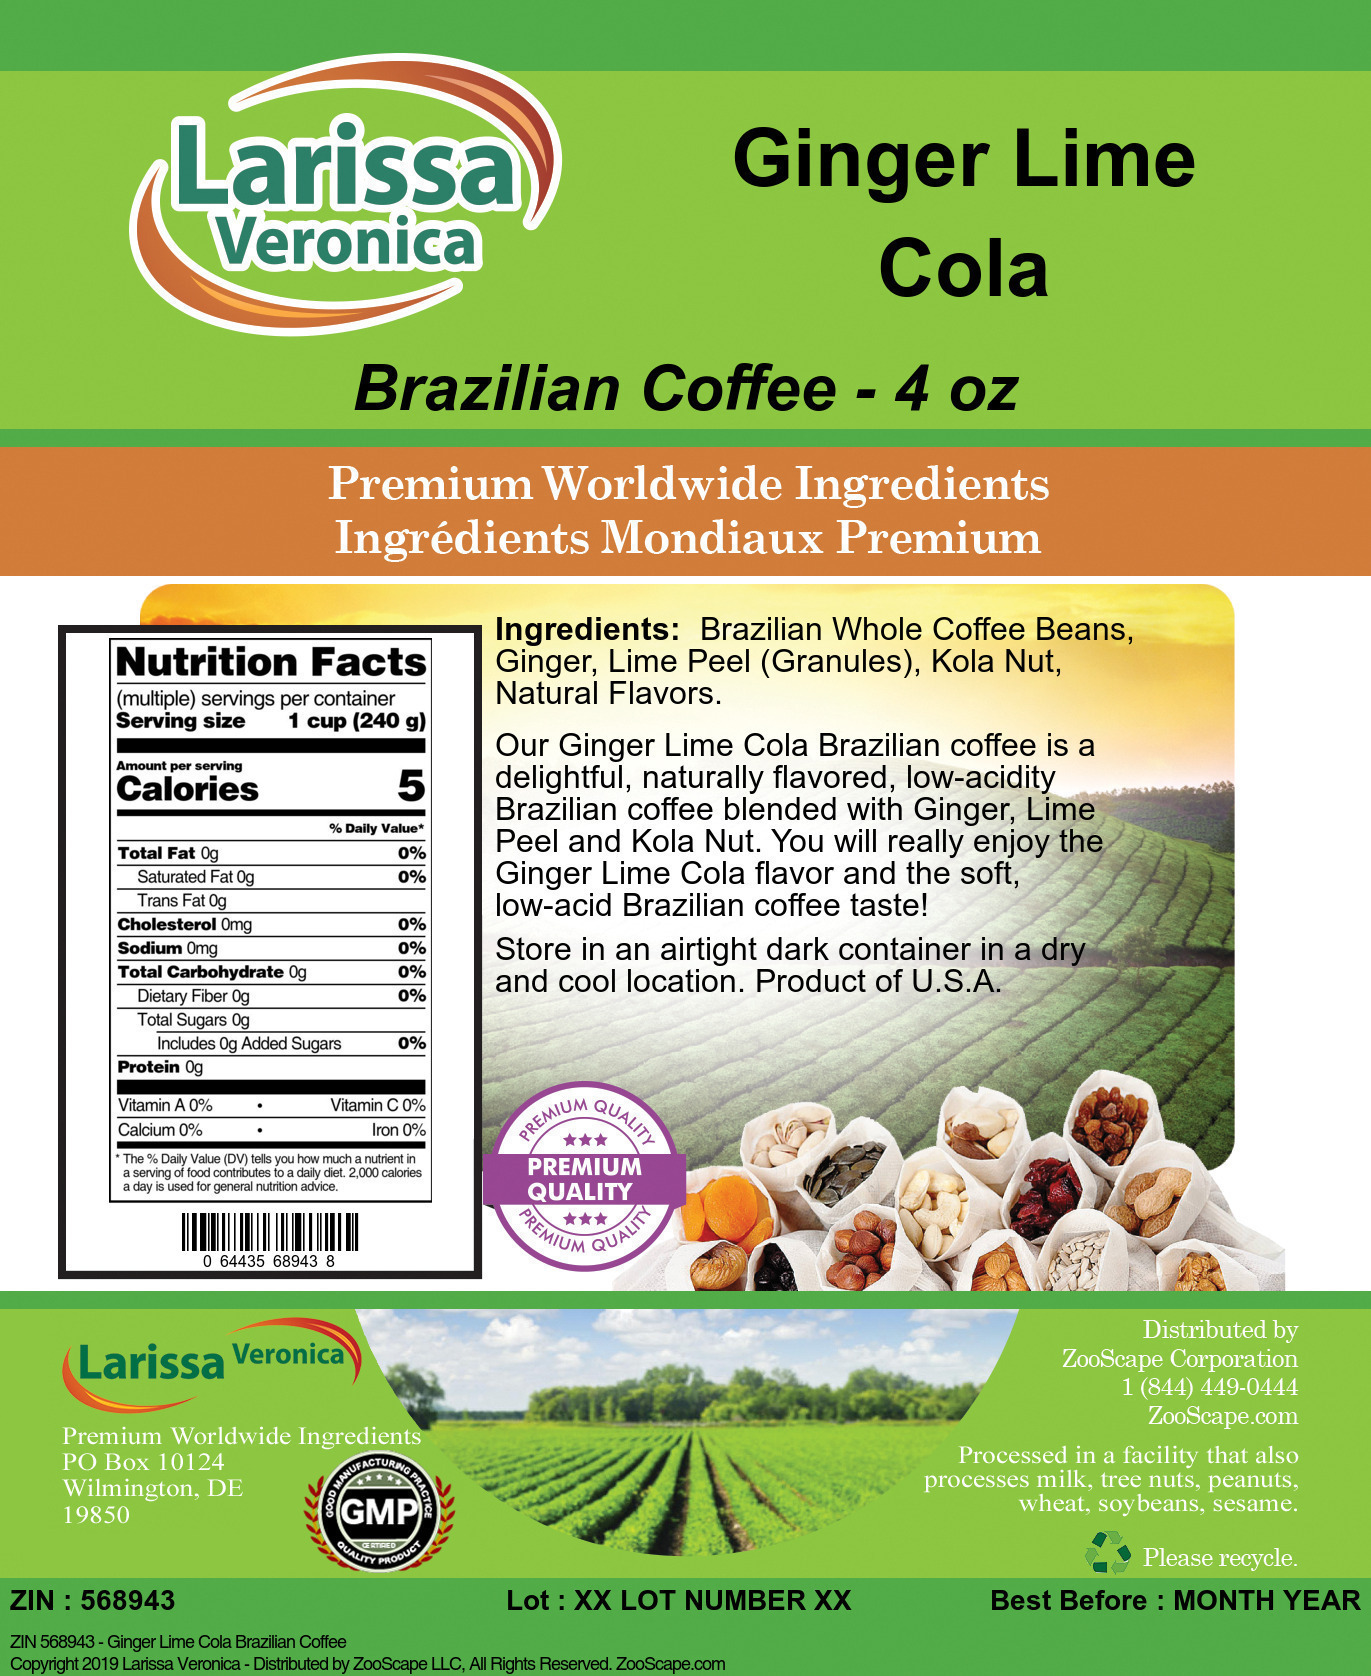 Ginger Lime Cola Brazilian Coffee - Label